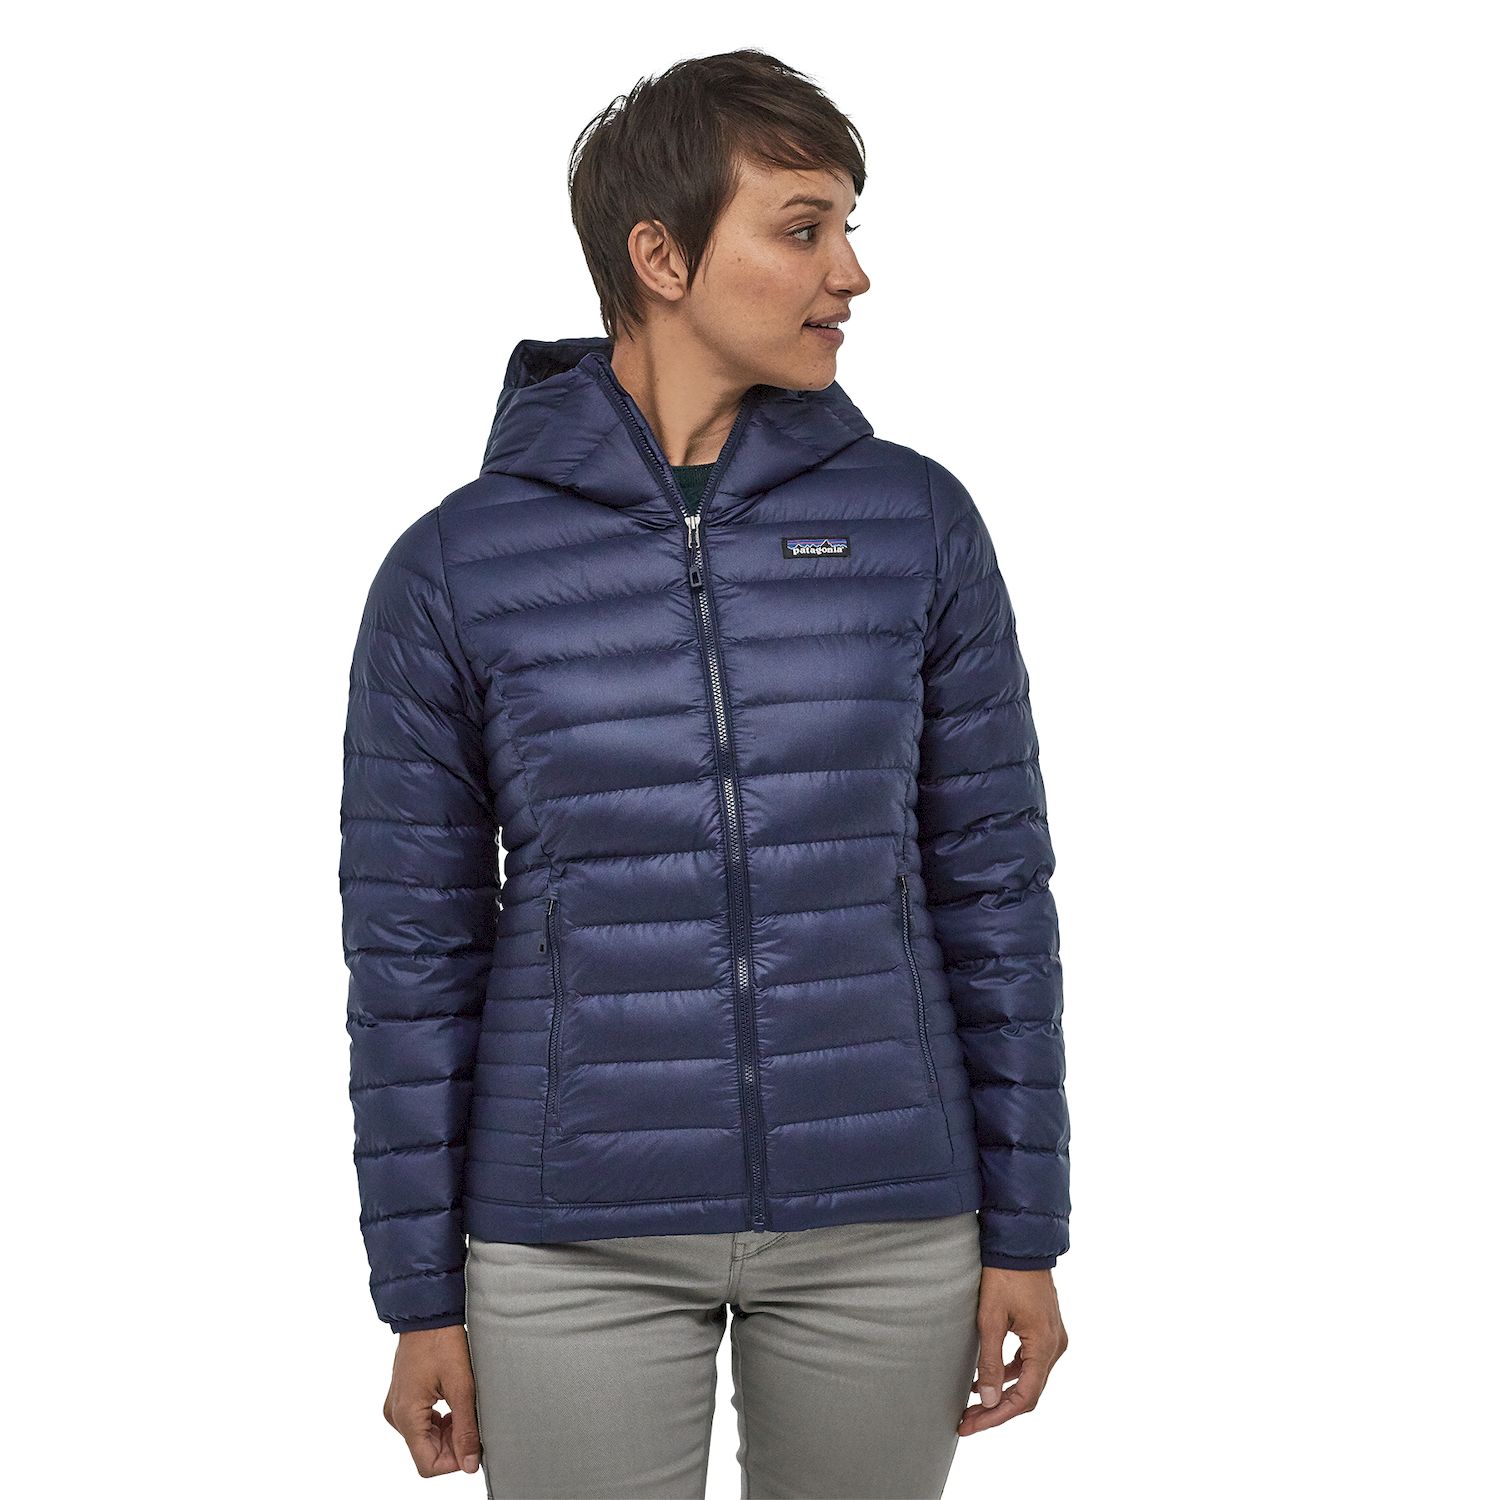 Patagonia Down Sweater Hoody - Doudoune capuche femme